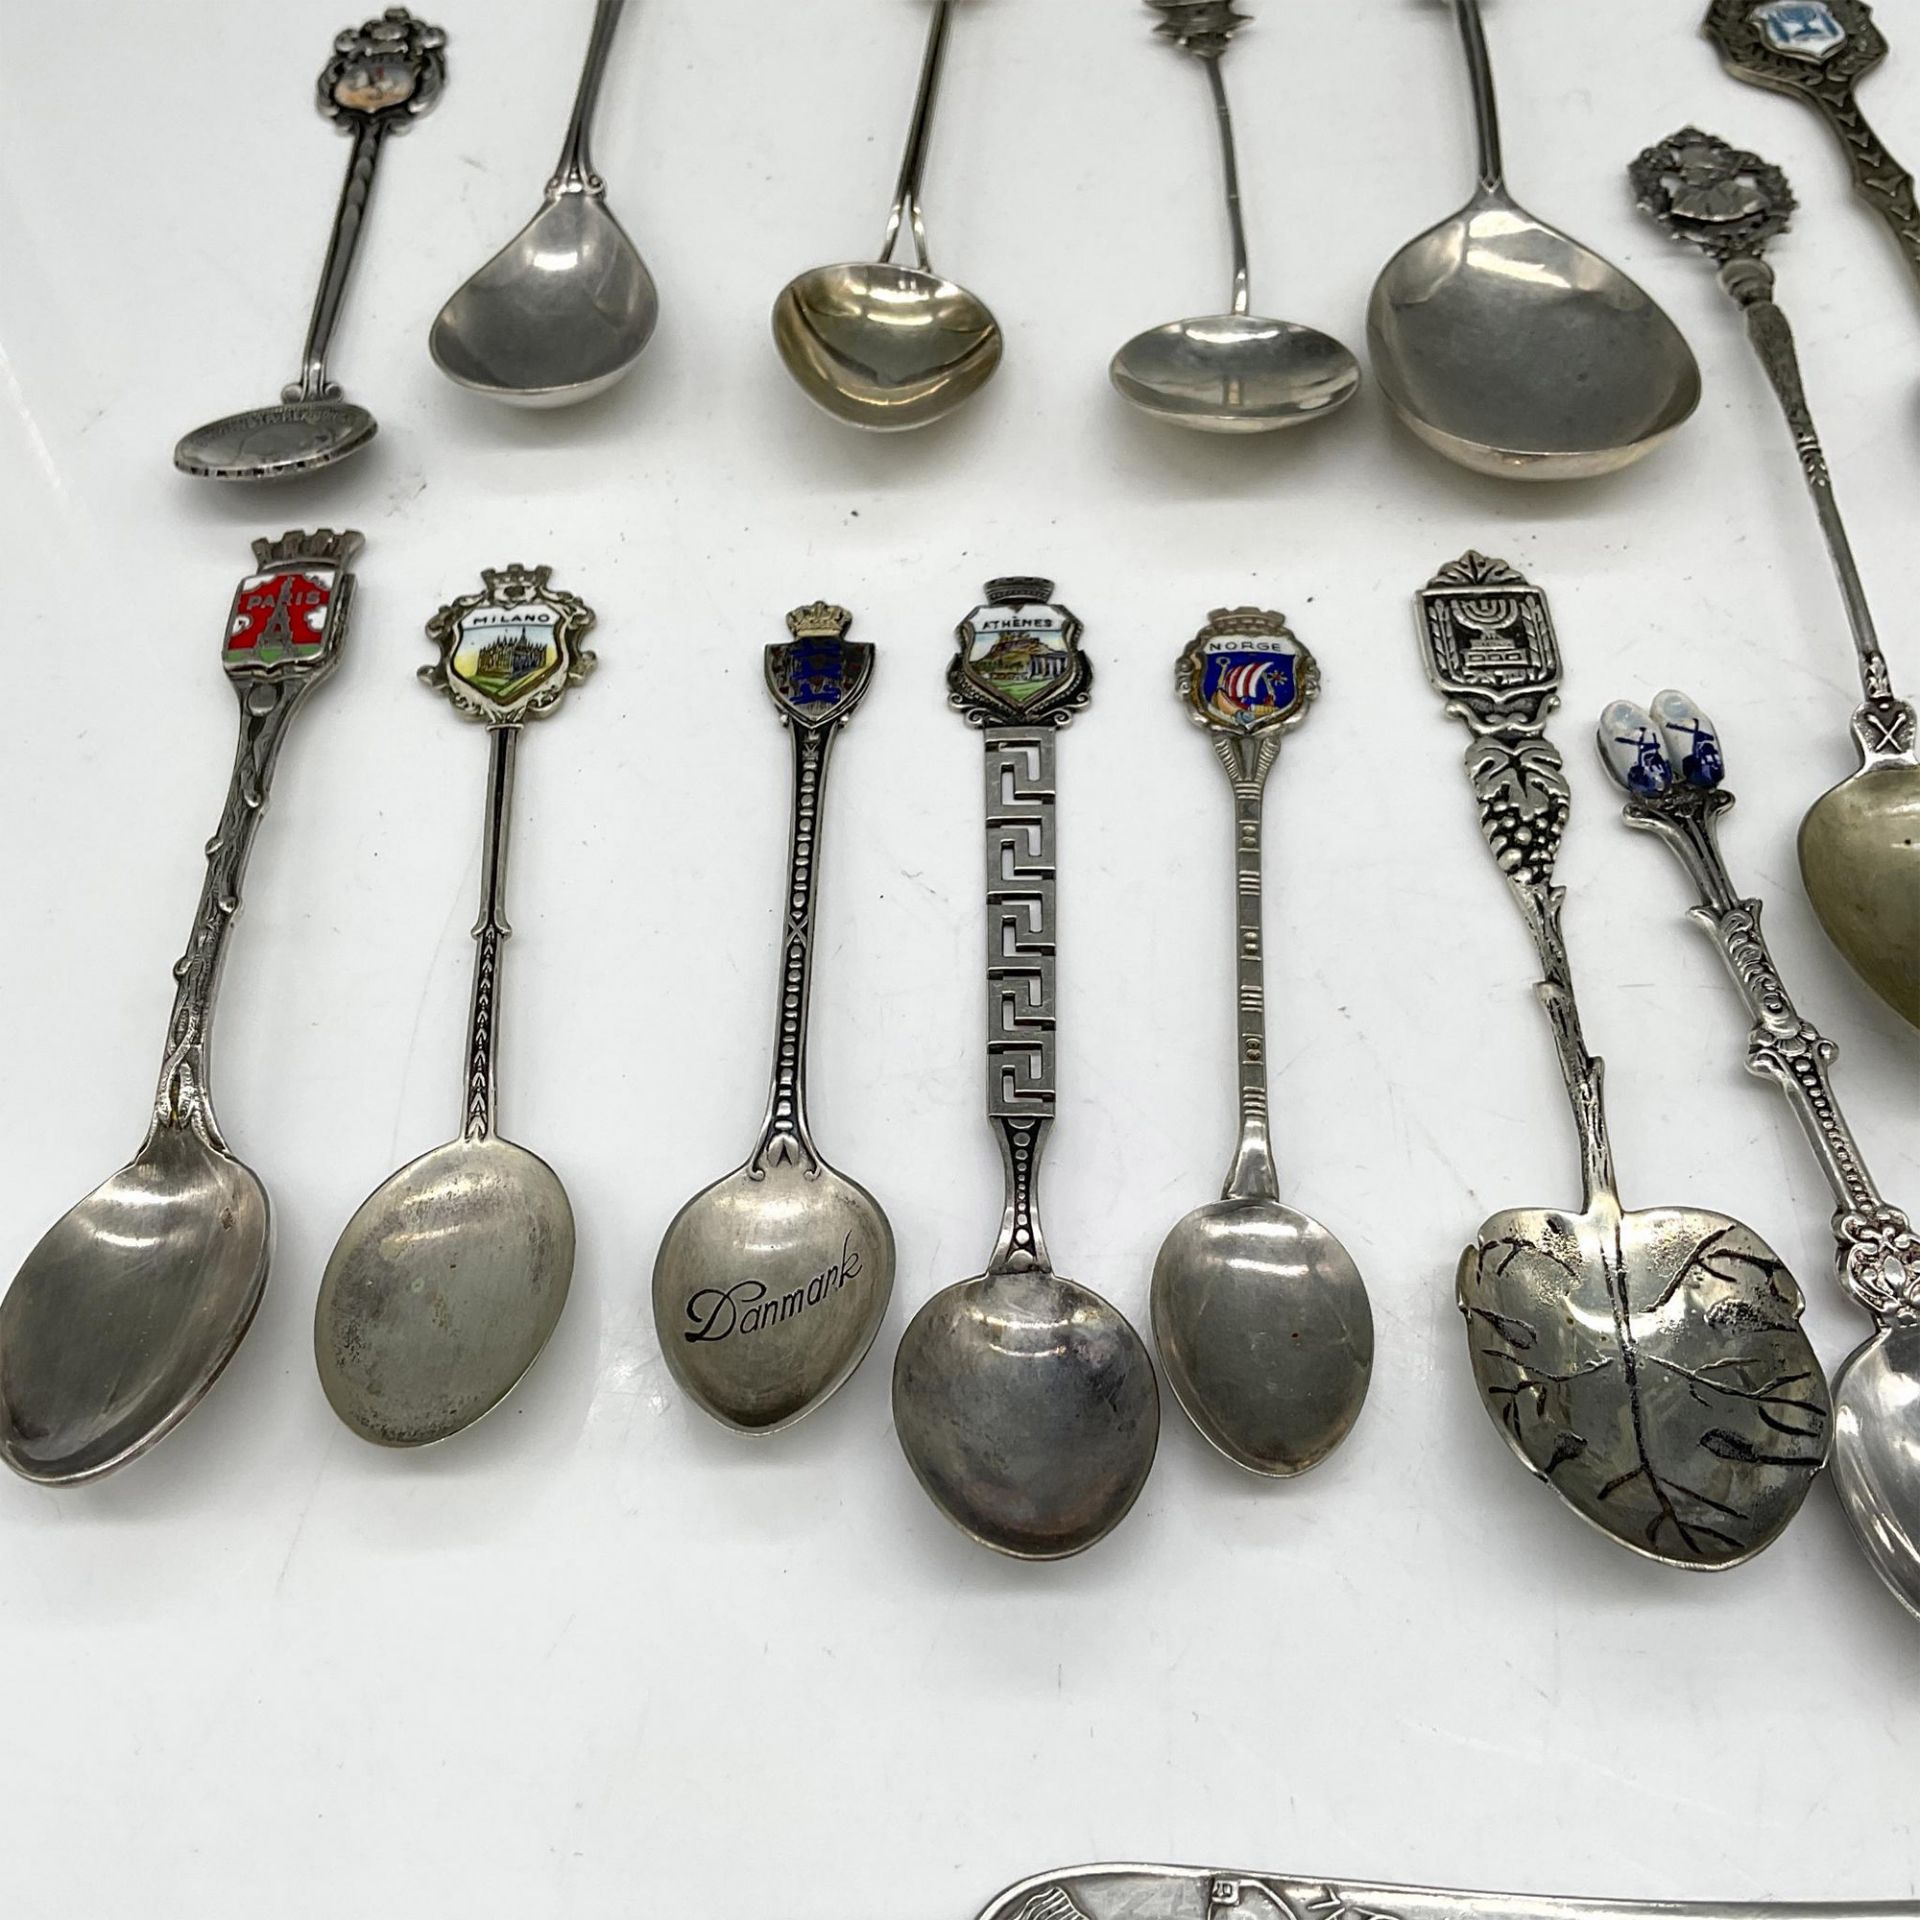 20pc Vintage Collectible Sterling + Silver Souvenir Spoons - Image 3 of 5